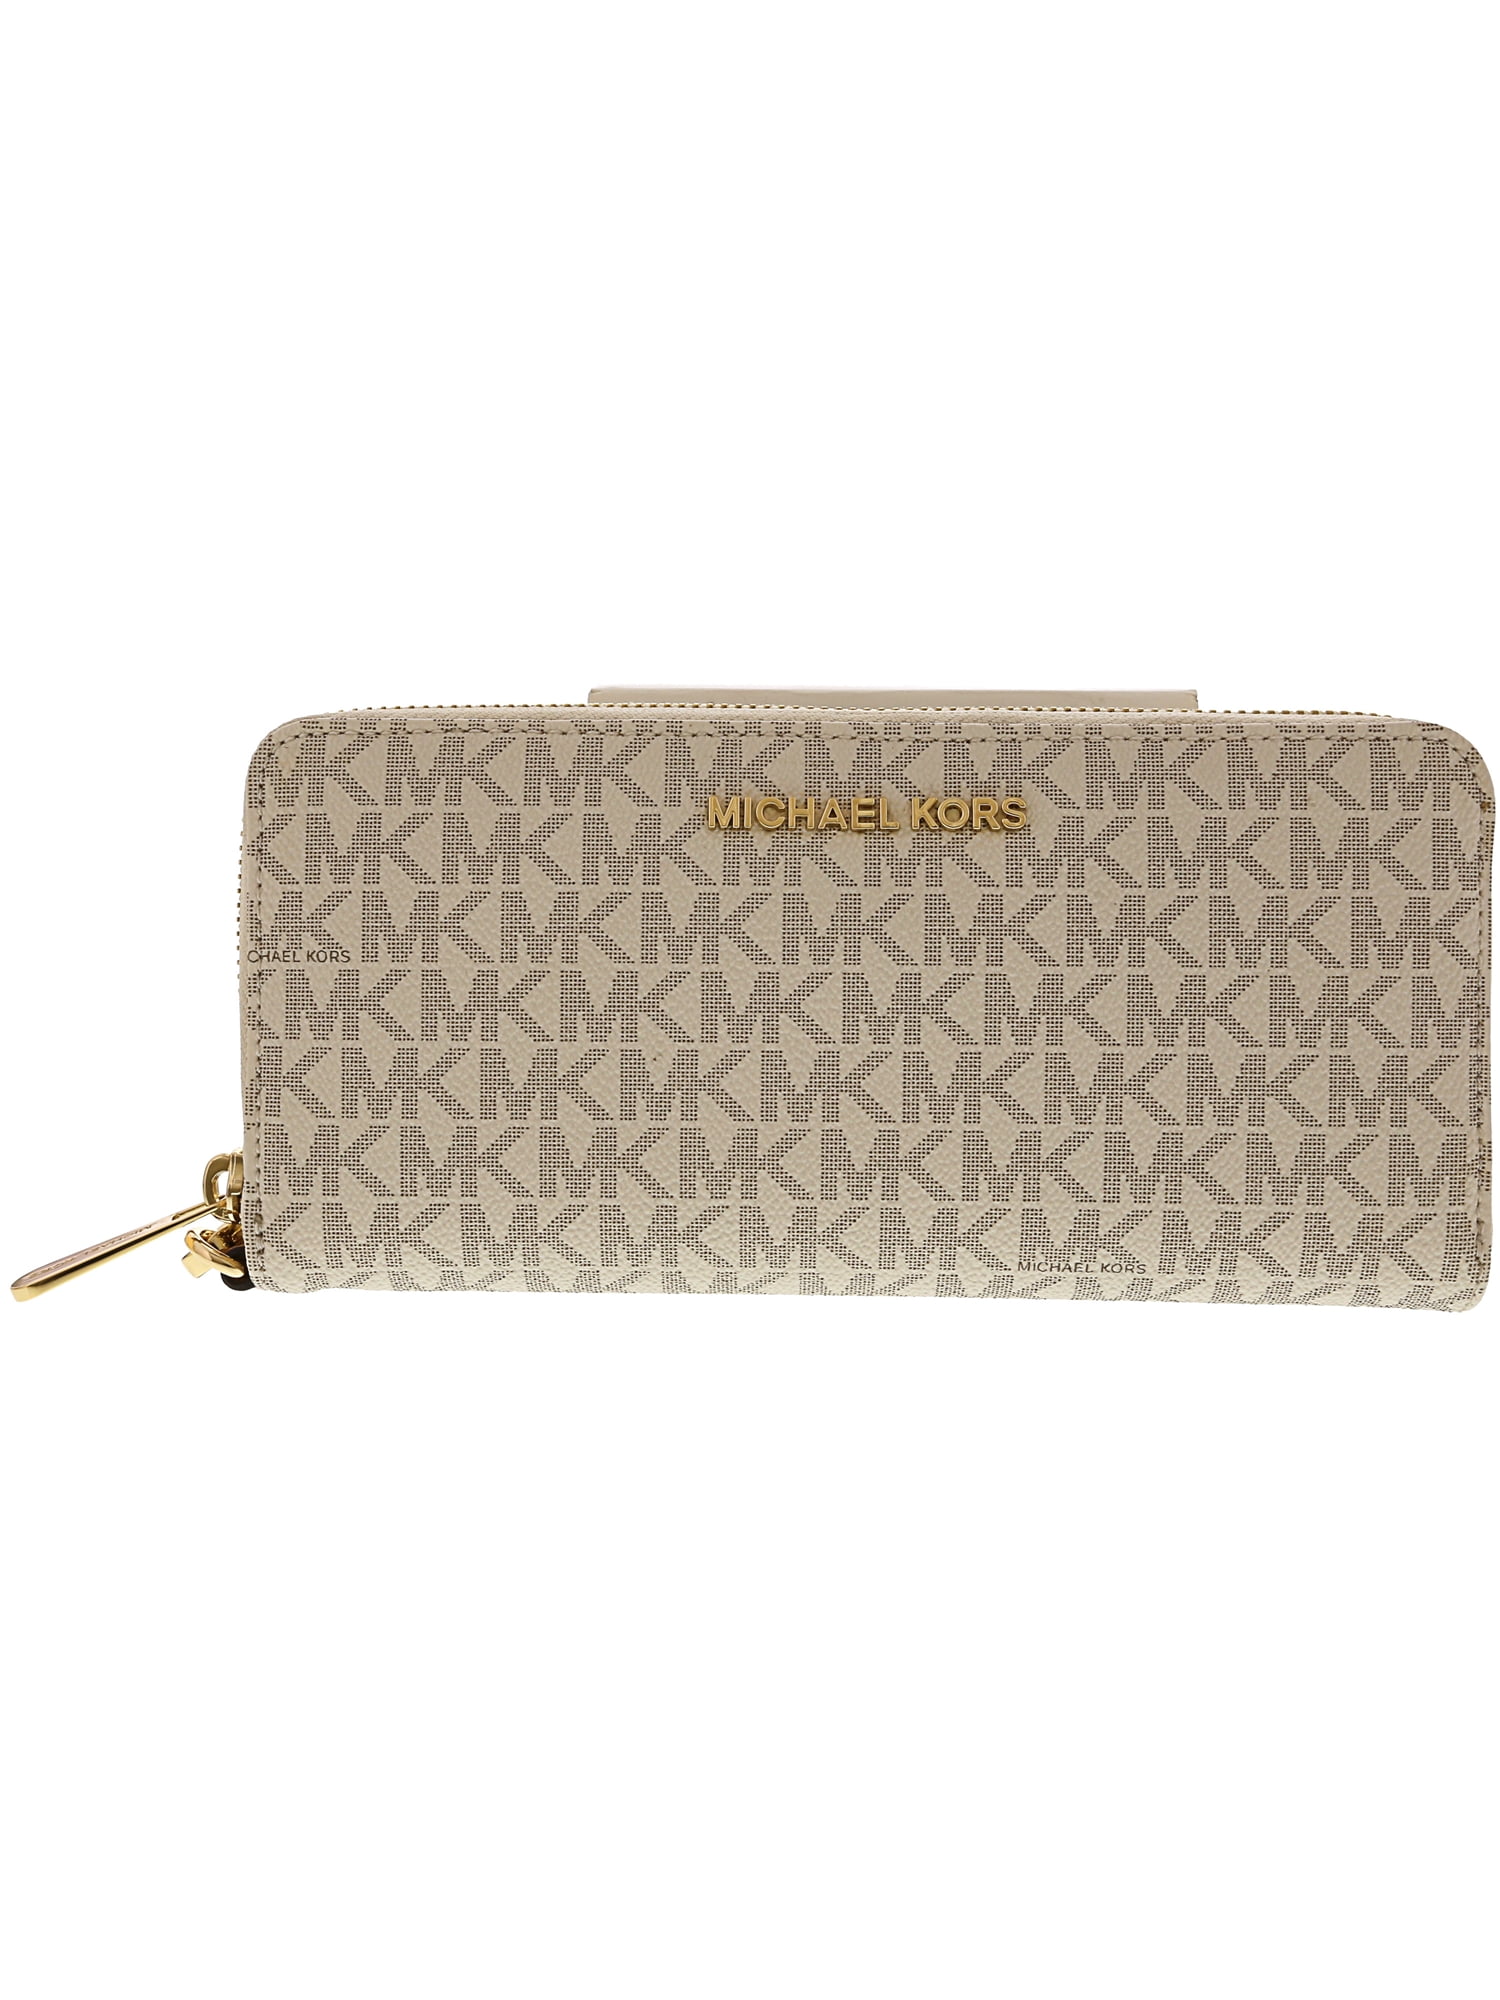 Michael Kors Vanilla Studded Signature Jet Set Travel Large Canvas Wallet, Best Price and Reviews